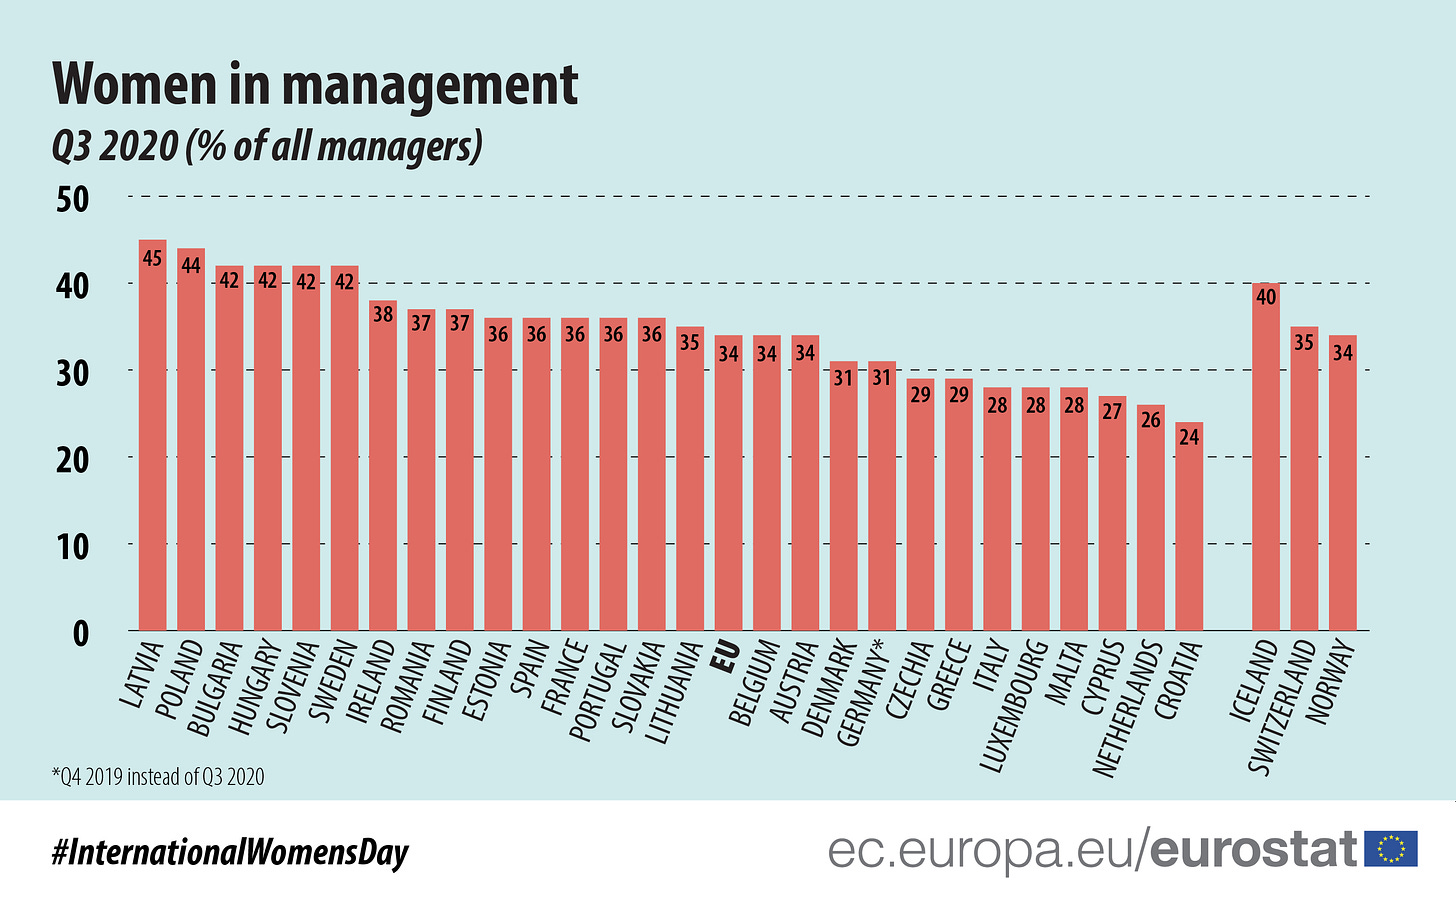 Women remain outnumbered in management - Products Eurostat News - Eurostat